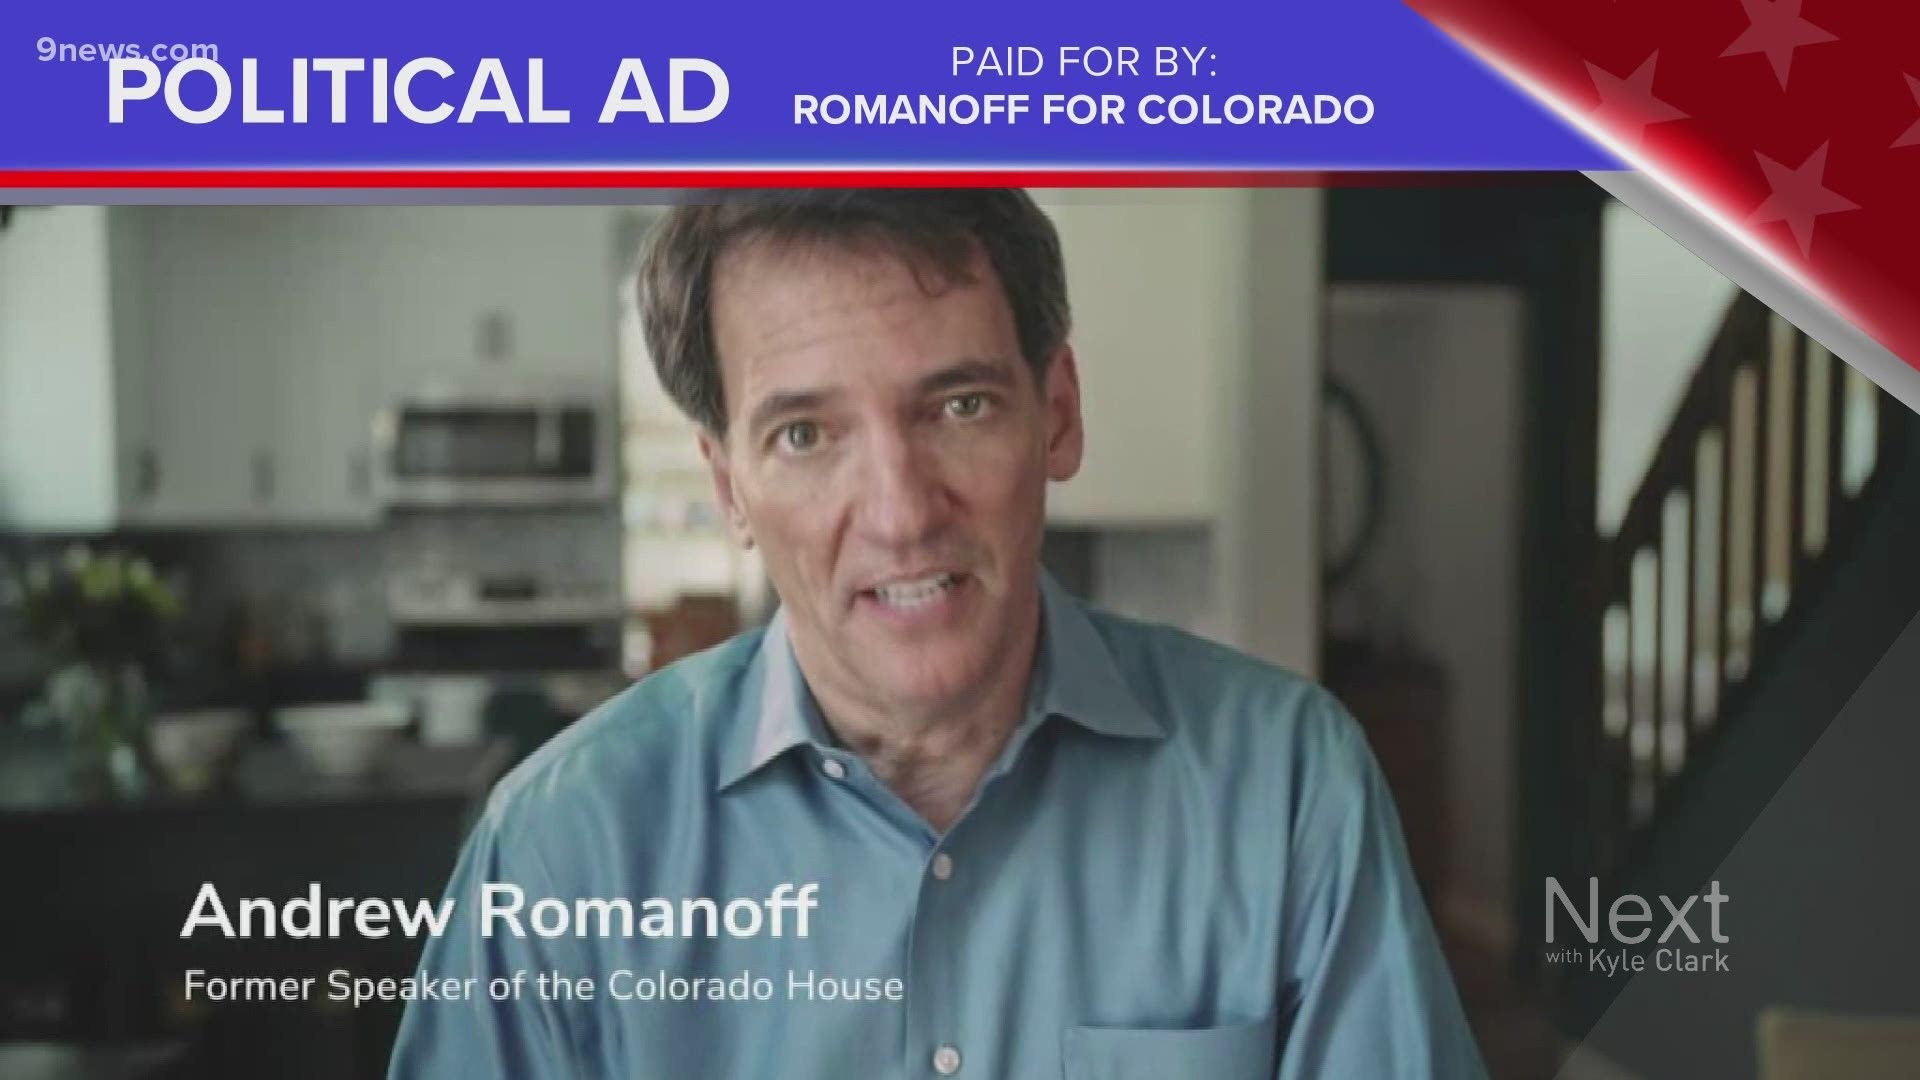 Romanoff, a Democrat running in Colorado's Senate primary, says insurance companies can by Congress in his ad.